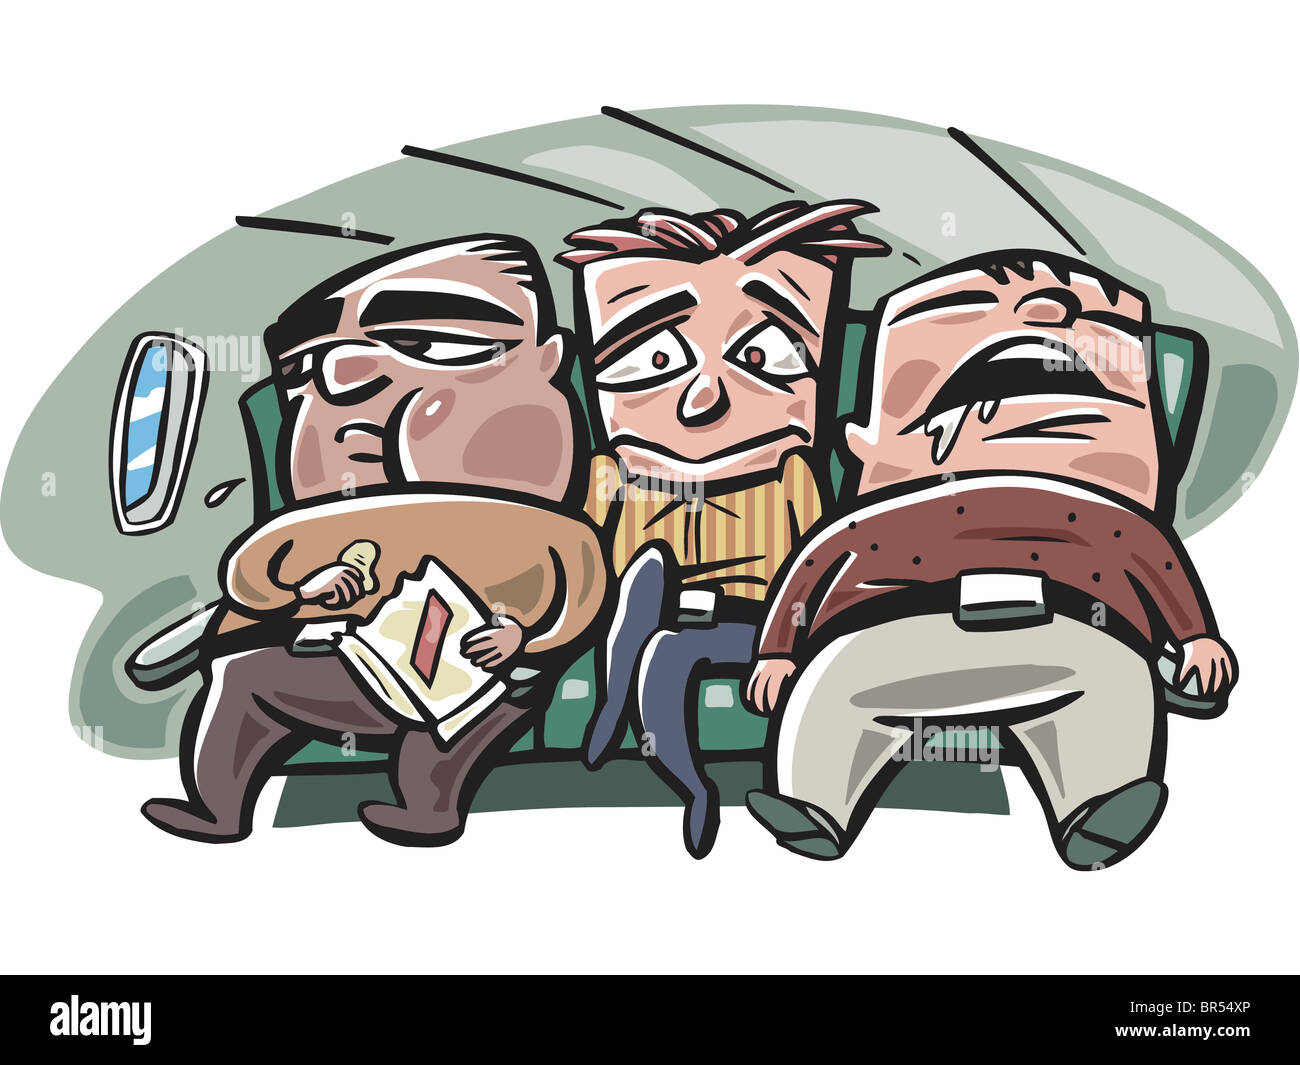 A Thin Man Being Squeezed By Two Fat Men On A Flight Stock Photo Alamy